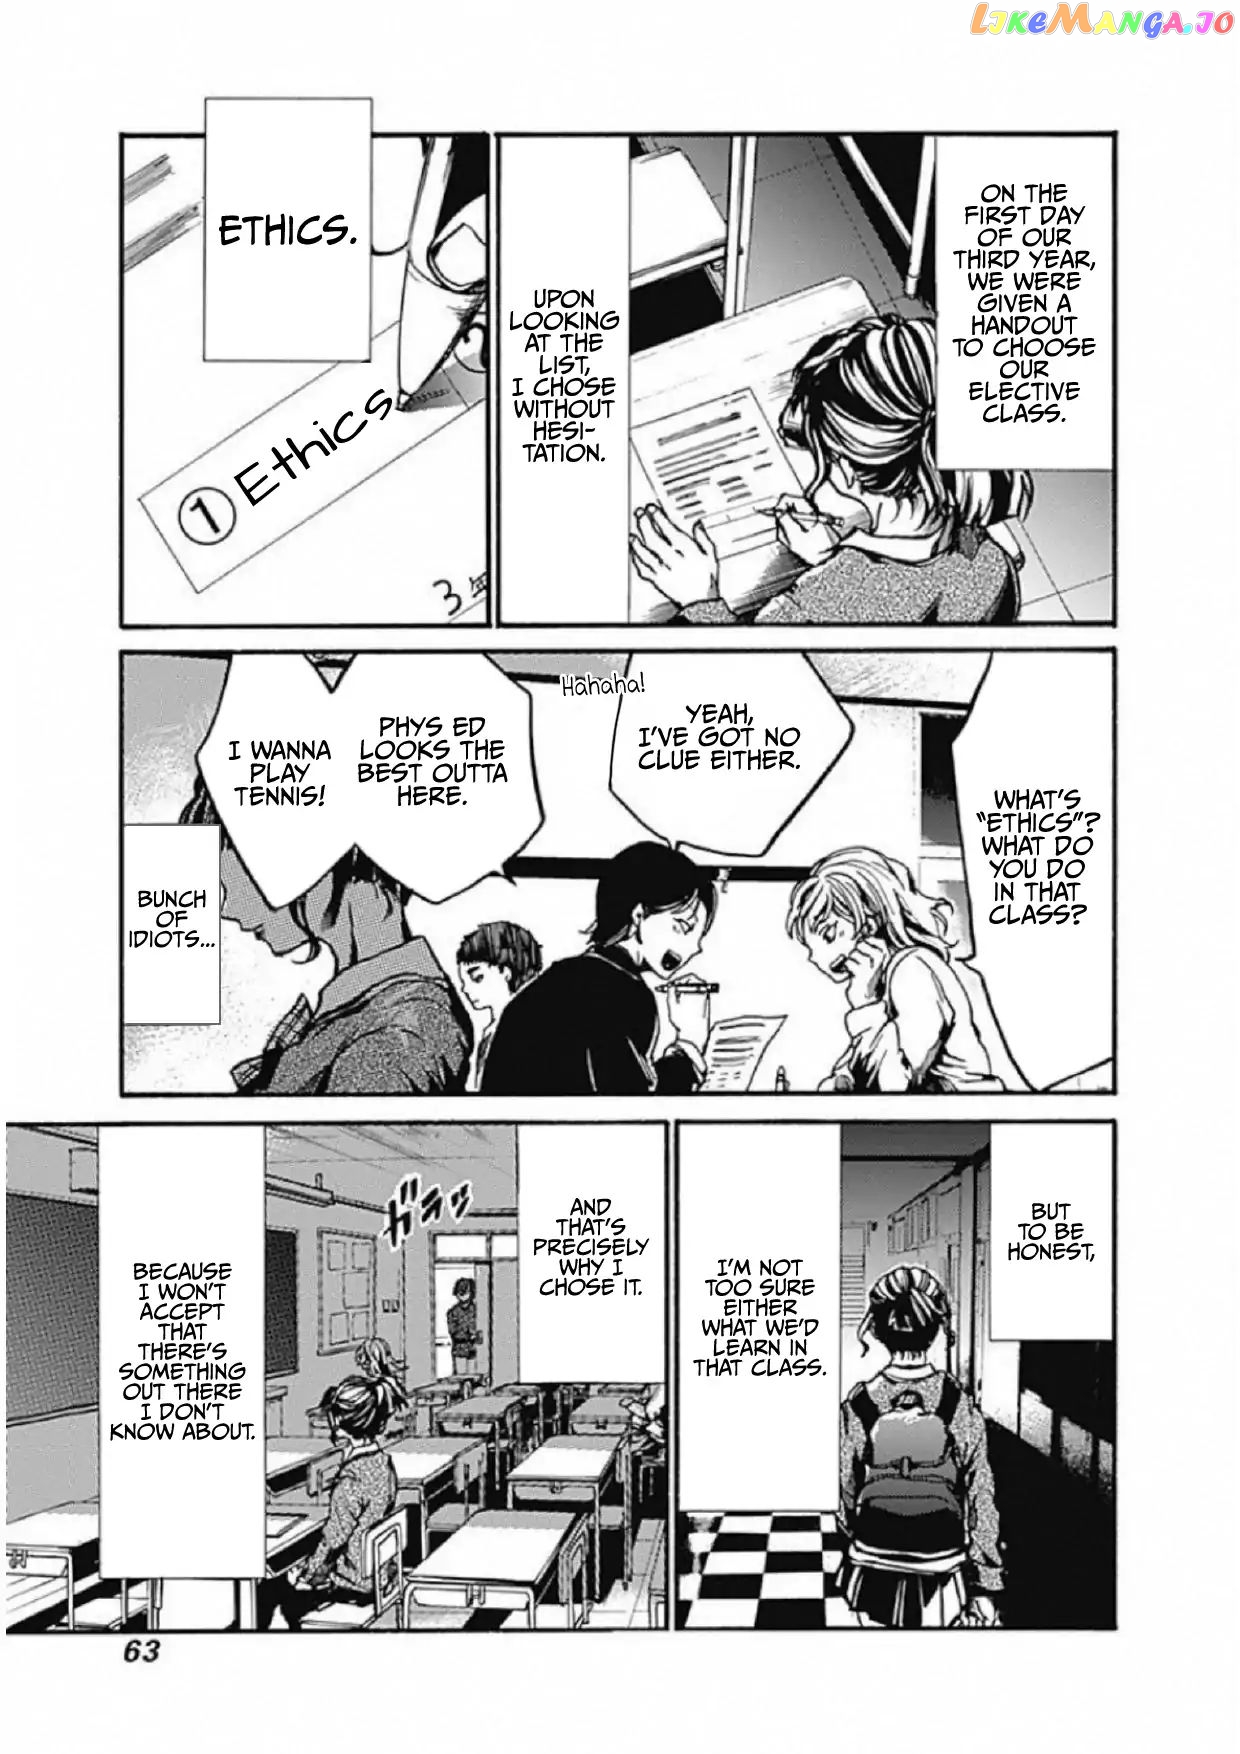 From Now on We Begin Ethics. chapter 2 - page 3